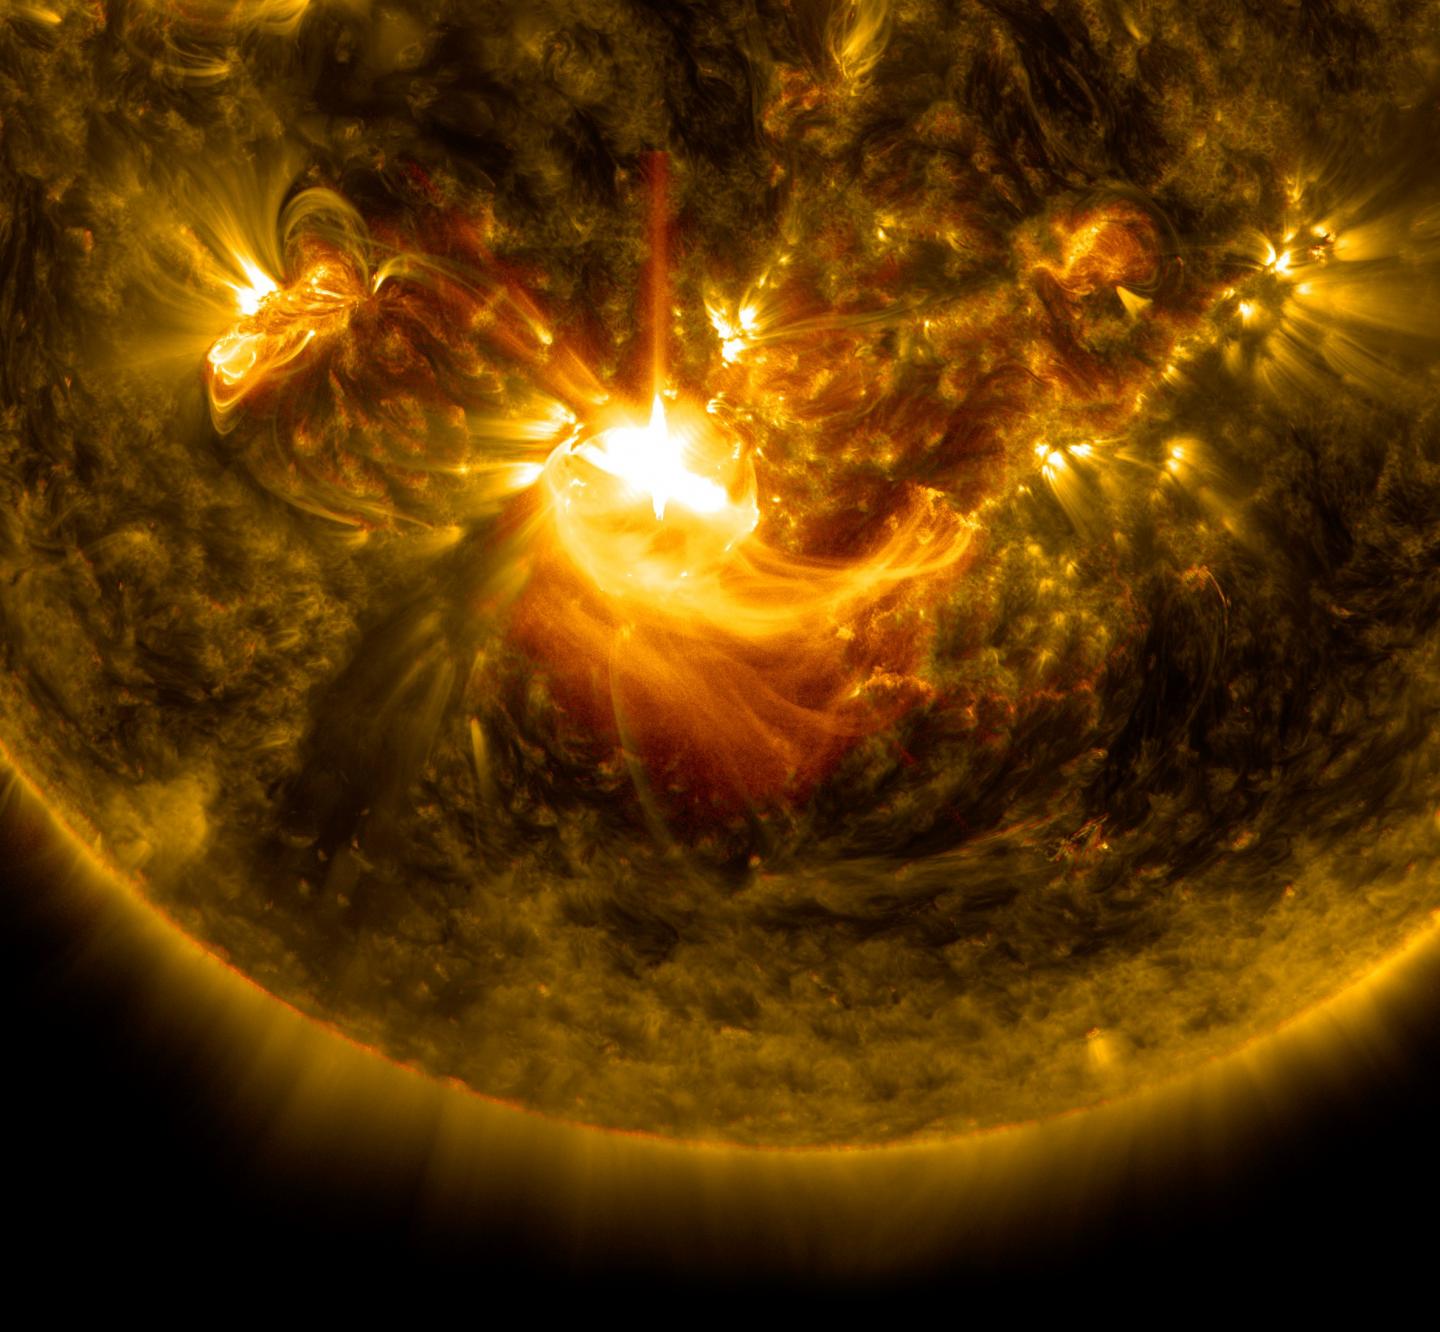 NASA's Sun Watching Observatory Sees Mid-level Solar Flare on Dec. 16, 2014